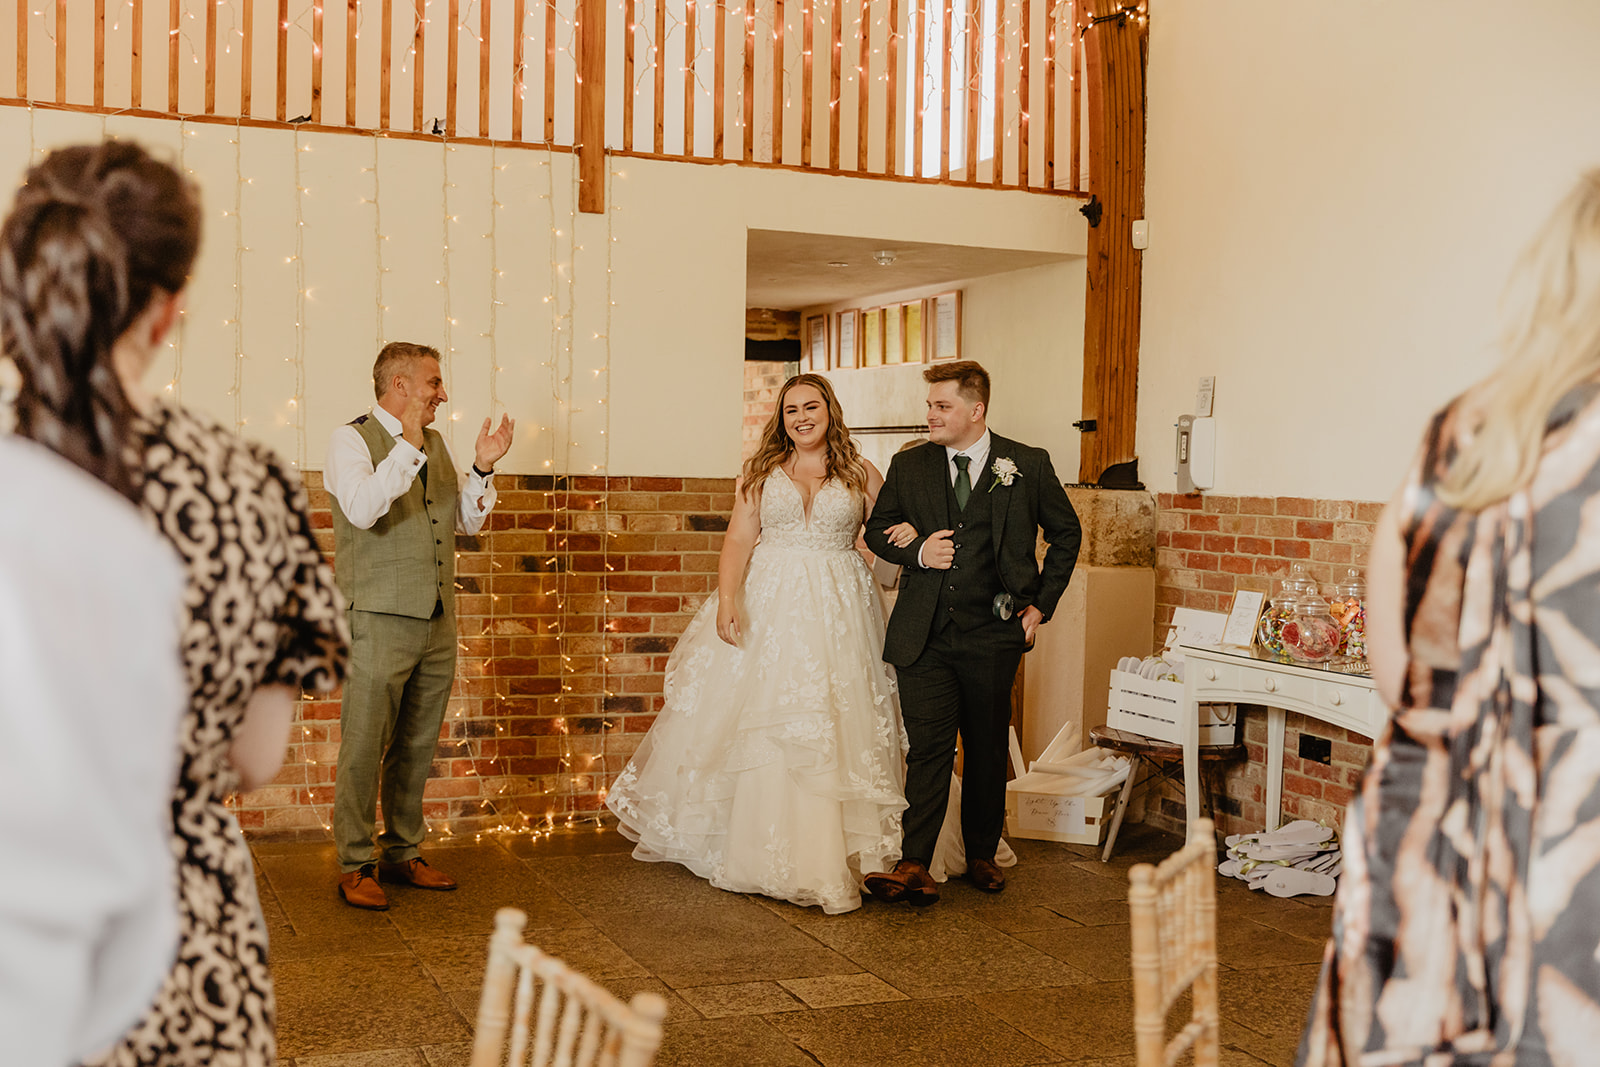 Bride and Groom at their reception at a Long Furlong Barn Wedding in Worthing, Sussex. By Olive Joy Photography.